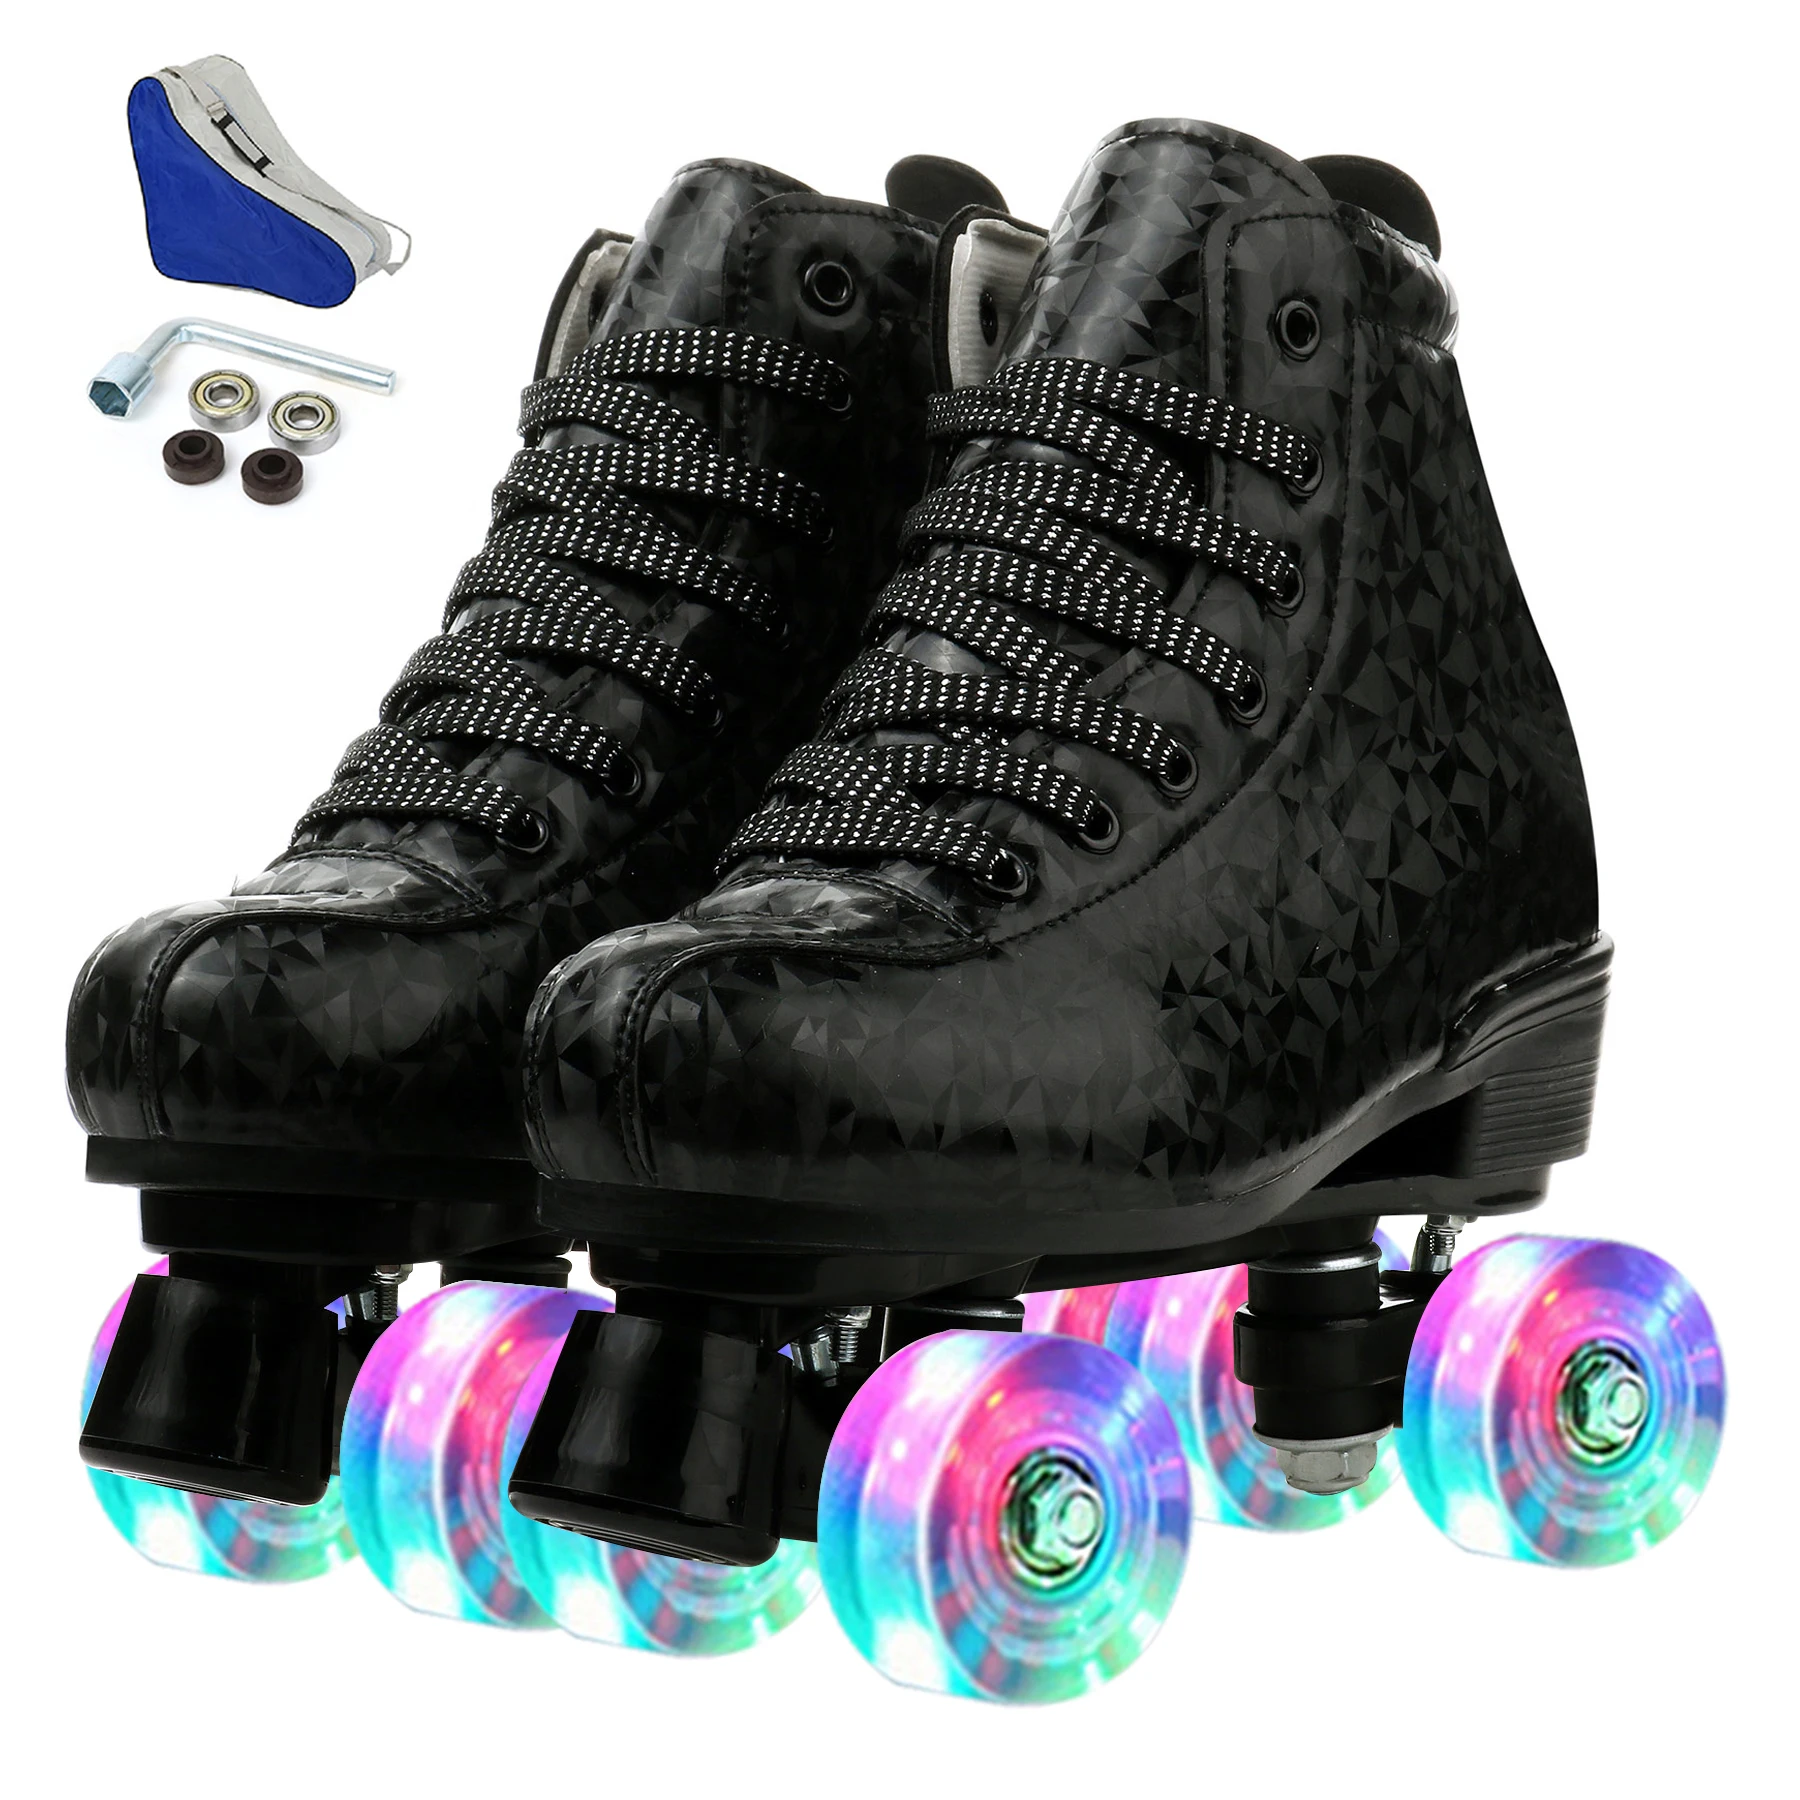 

2021 4 Wheels Girls Flashing Skate Shoes Quad Roller Skating Shoes Sneakers 2 Row Line Outdoor Gym Sports Women Men Euro Size